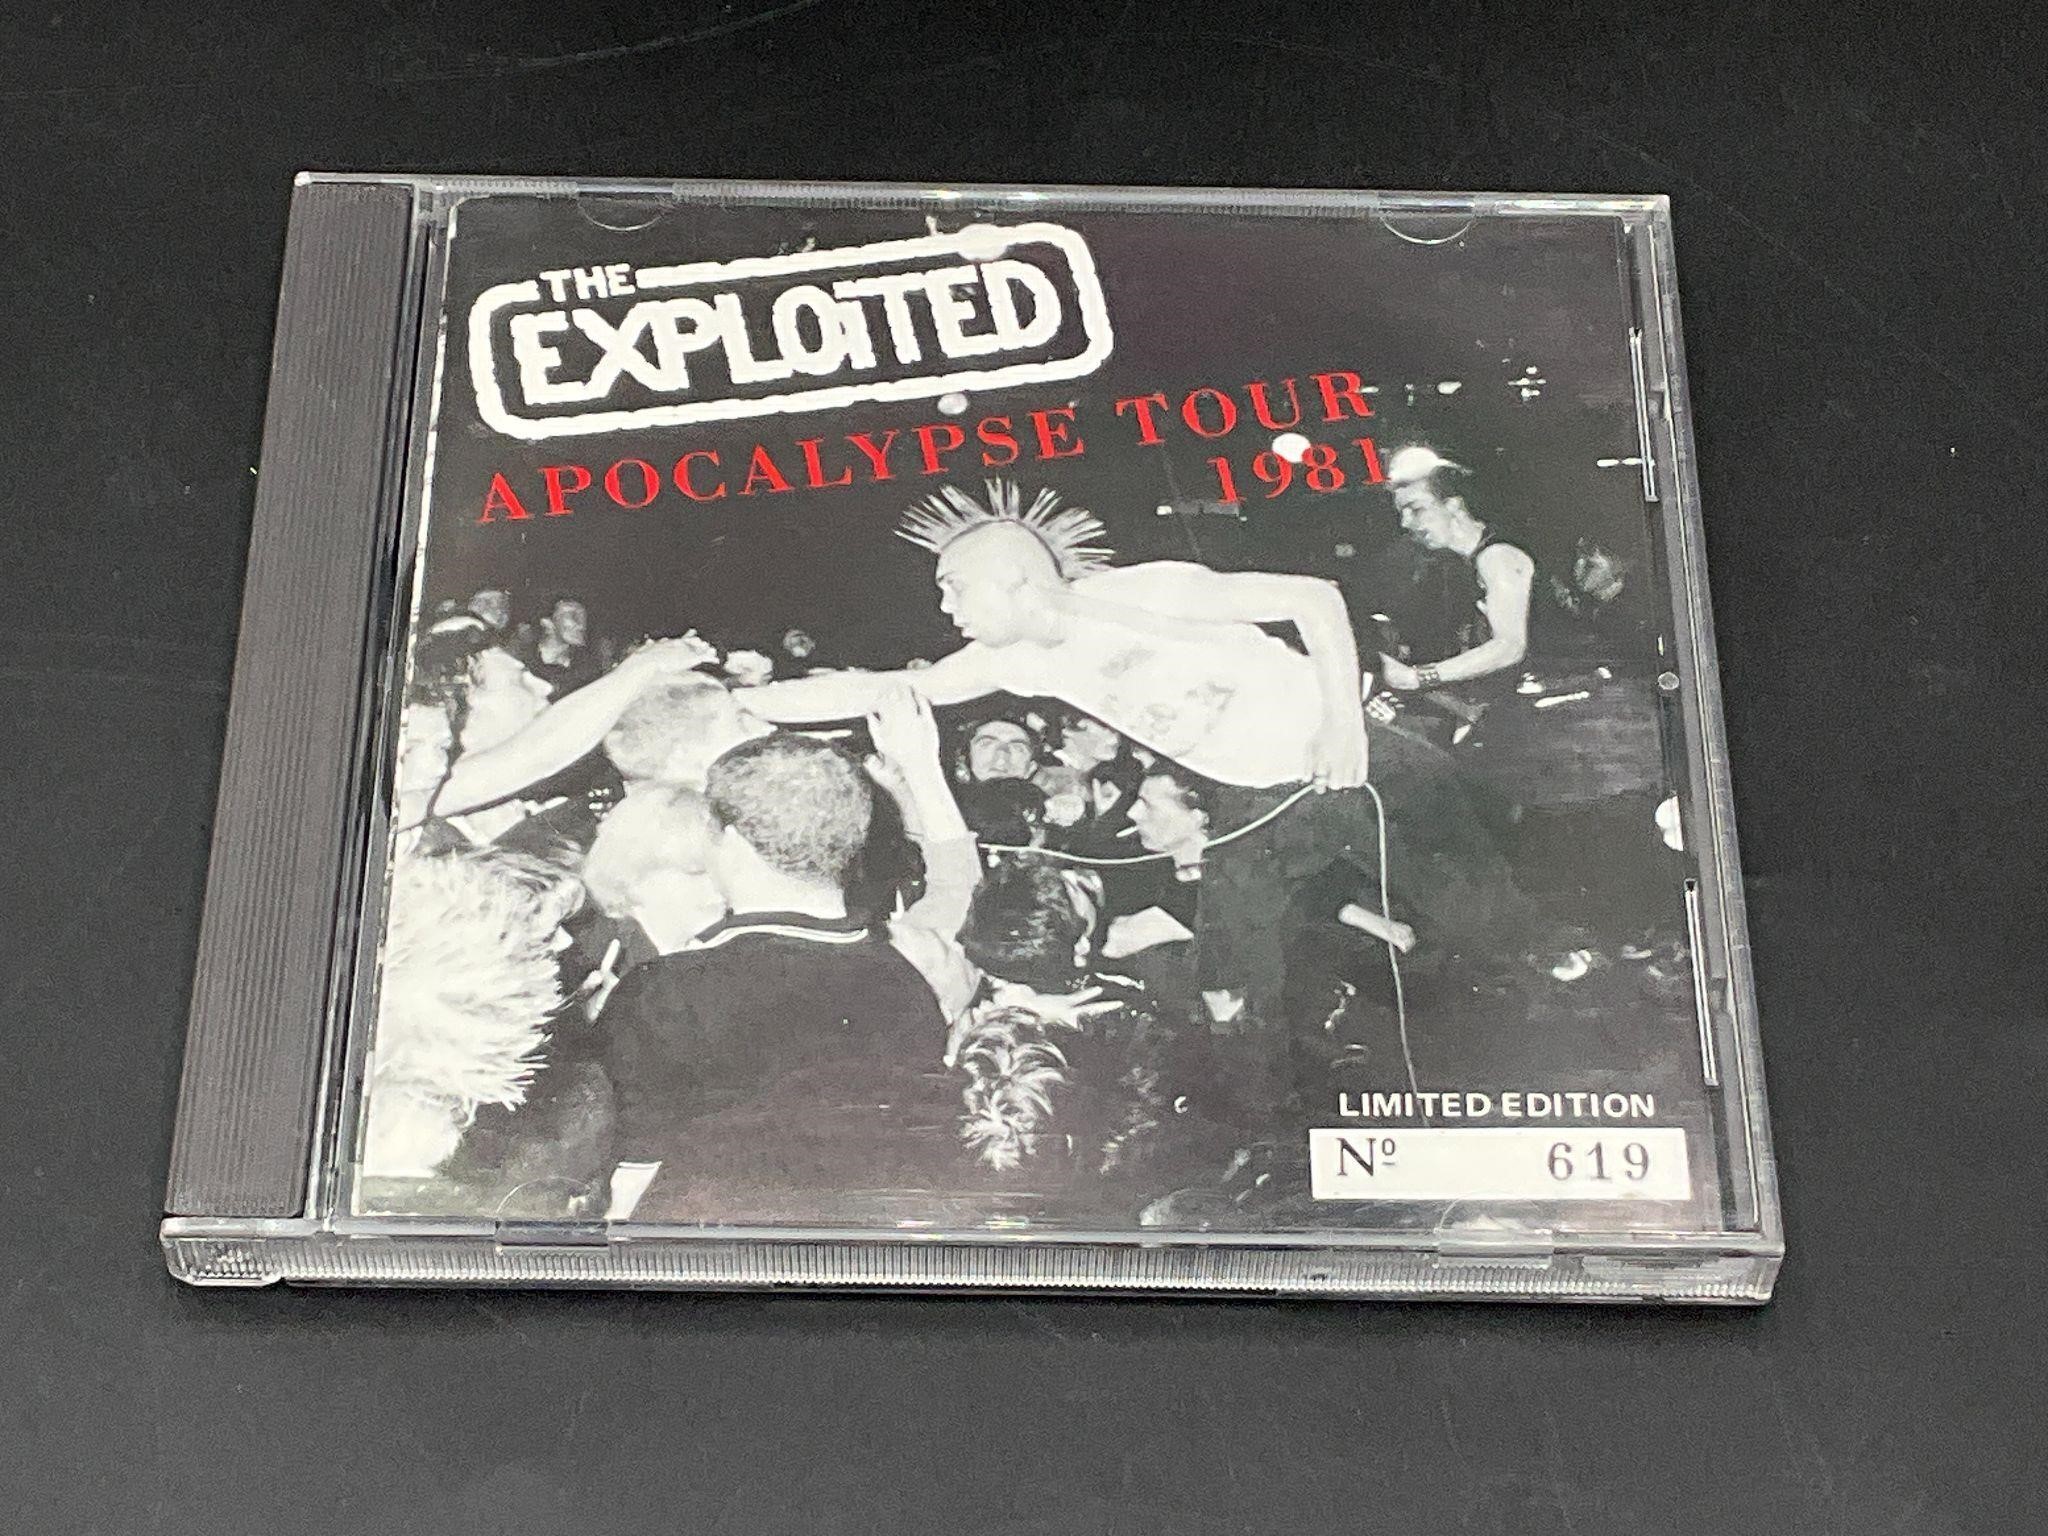 Exploited "Apocoaypse Tour 1981" Numbered Punk Cd